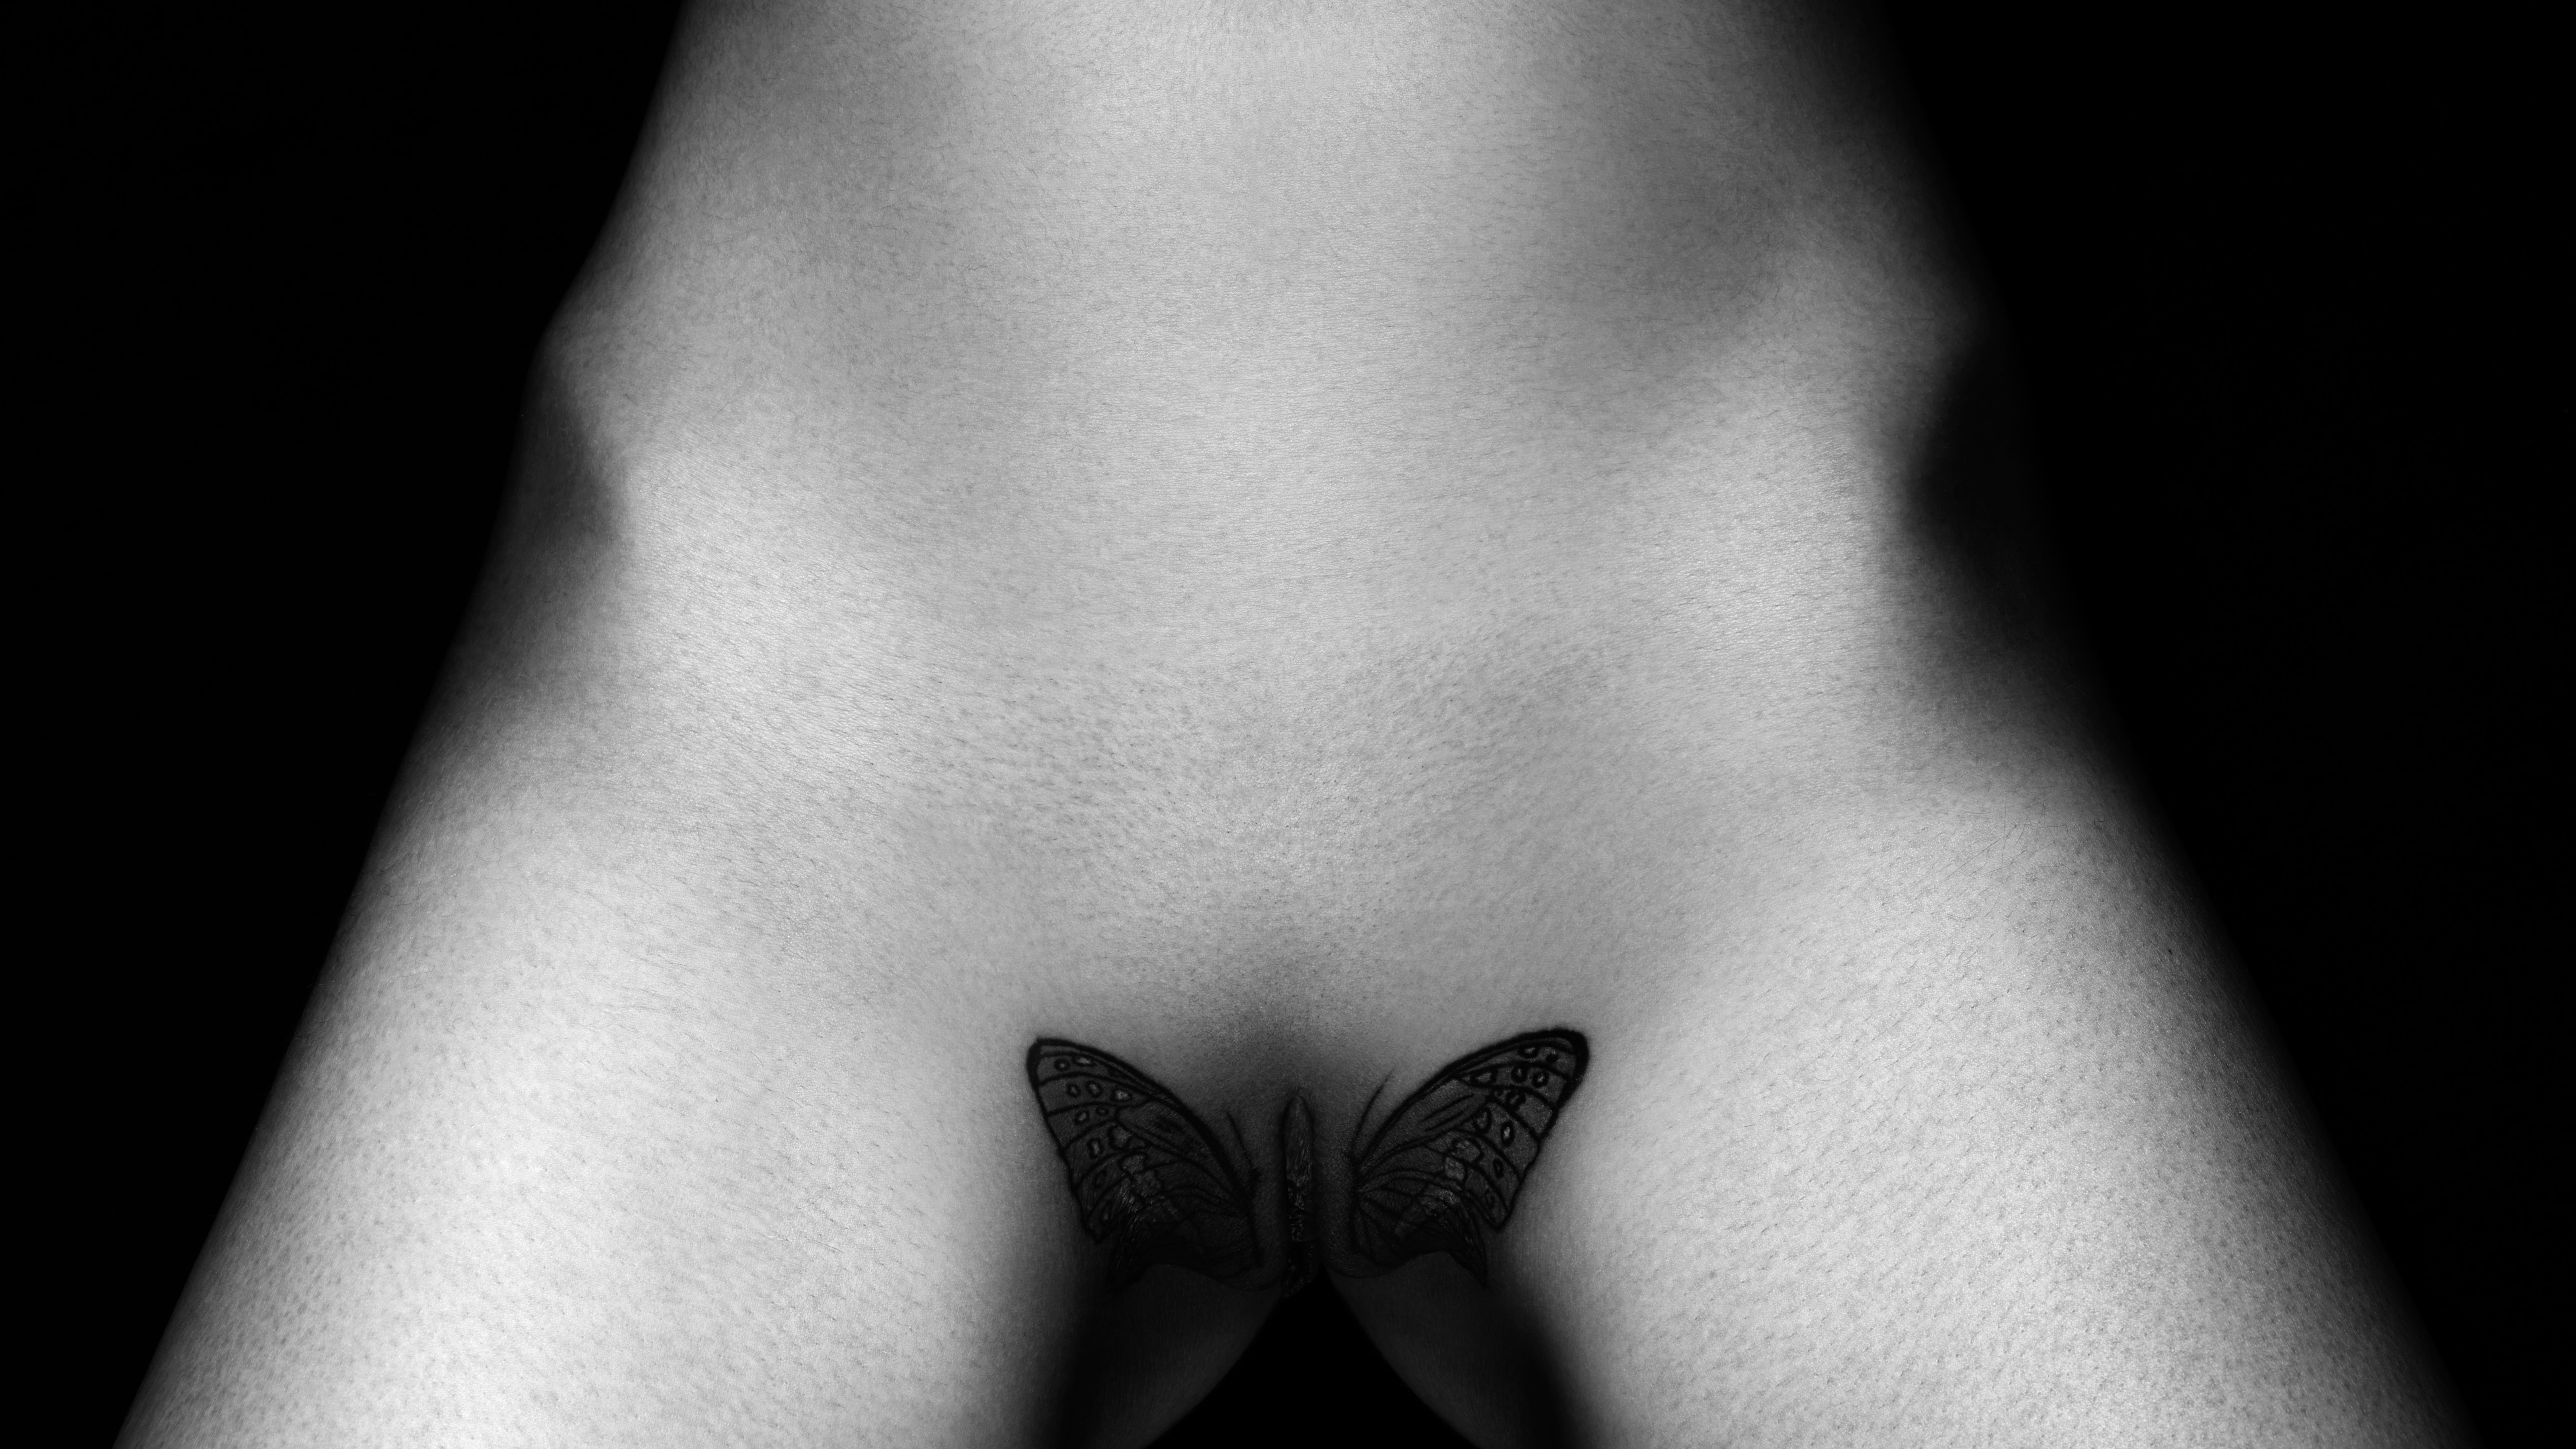 abdullah azmy recommends butterfly vagina tattoo pic